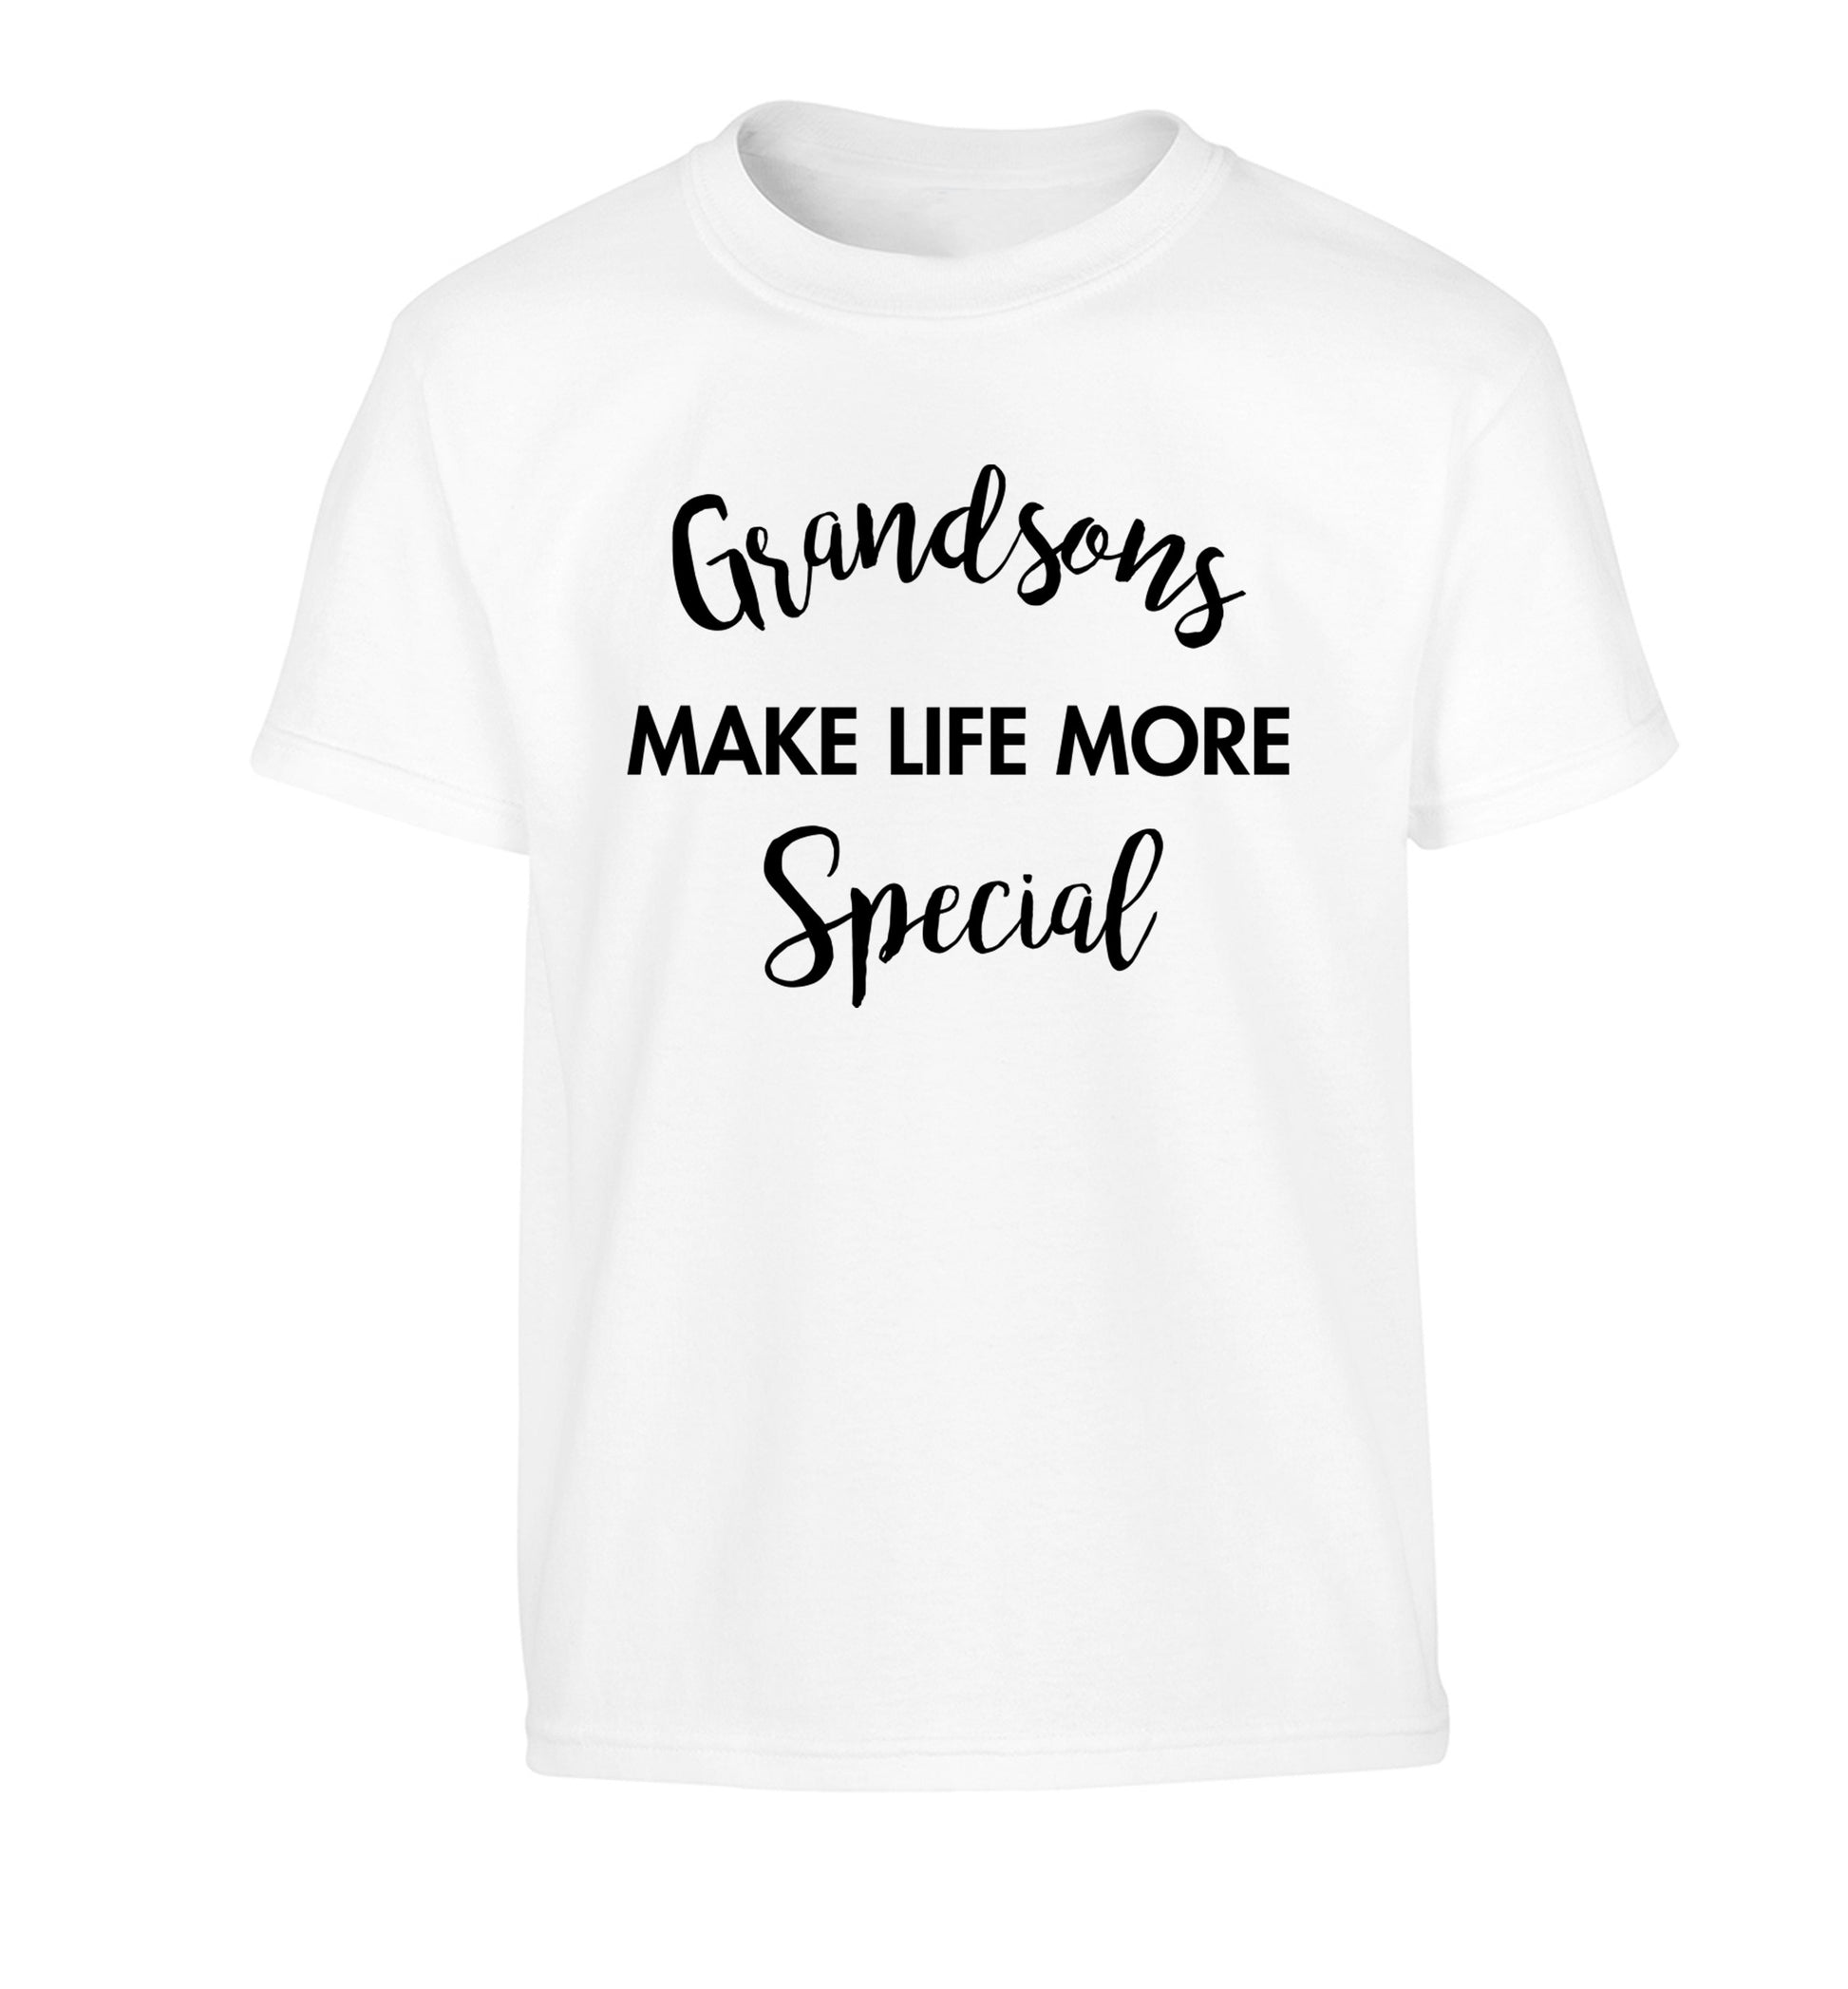 Grandsons make life more special Children's white Tshirt 12-14 Years